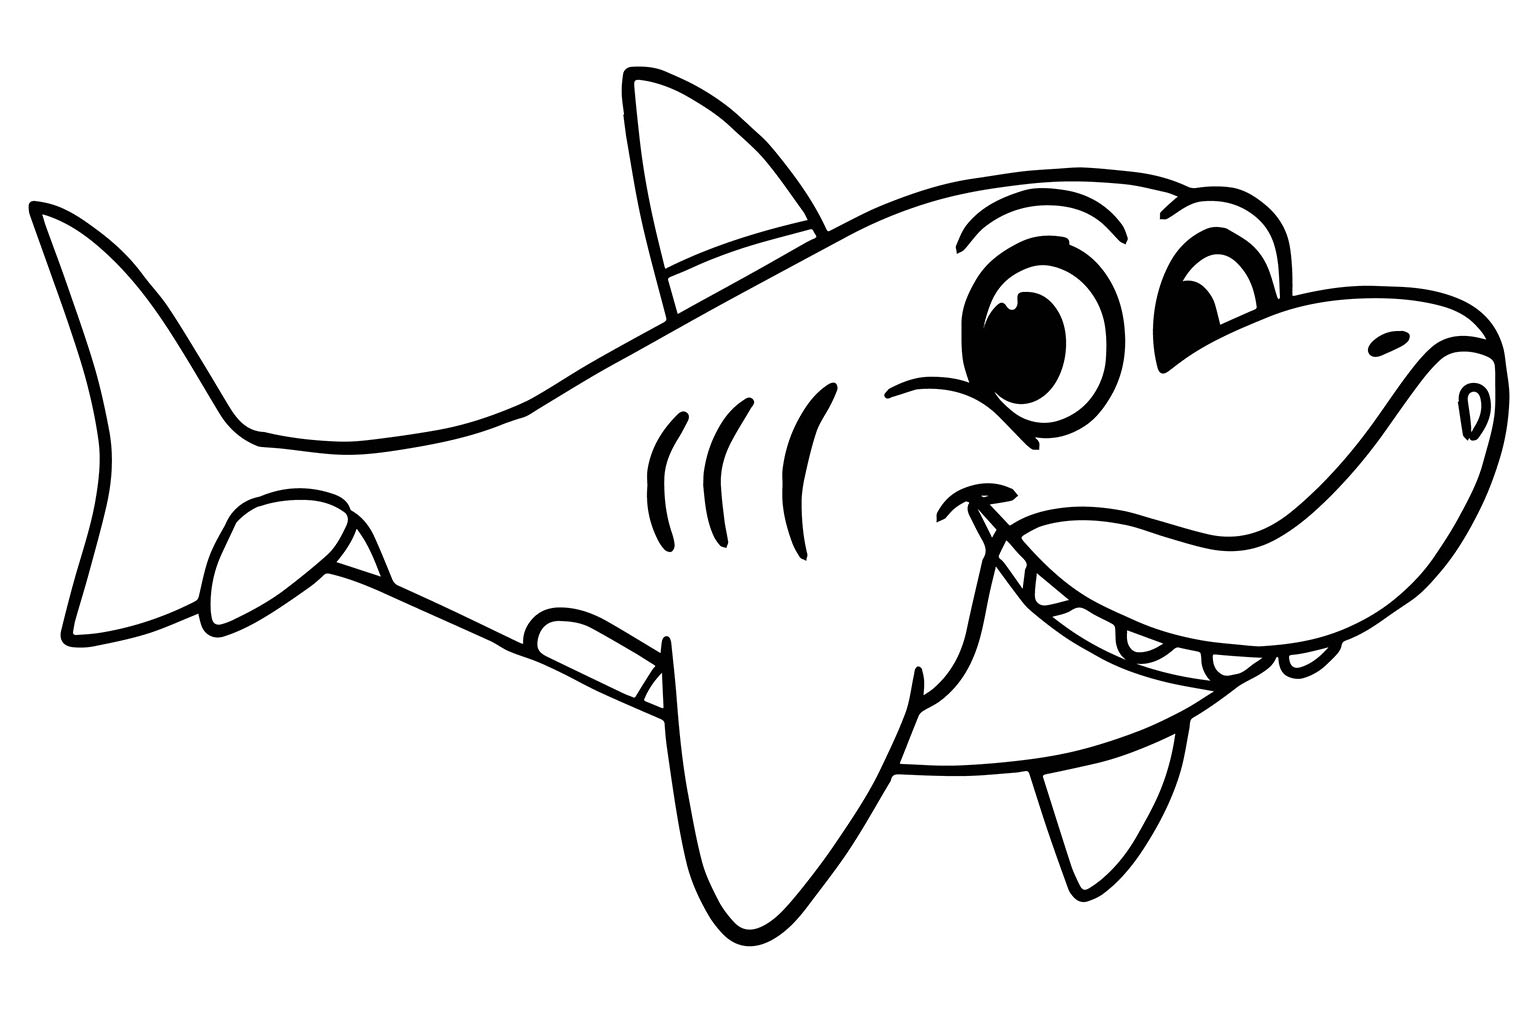 Requin souriant - Sharks Kids Coloring Pages